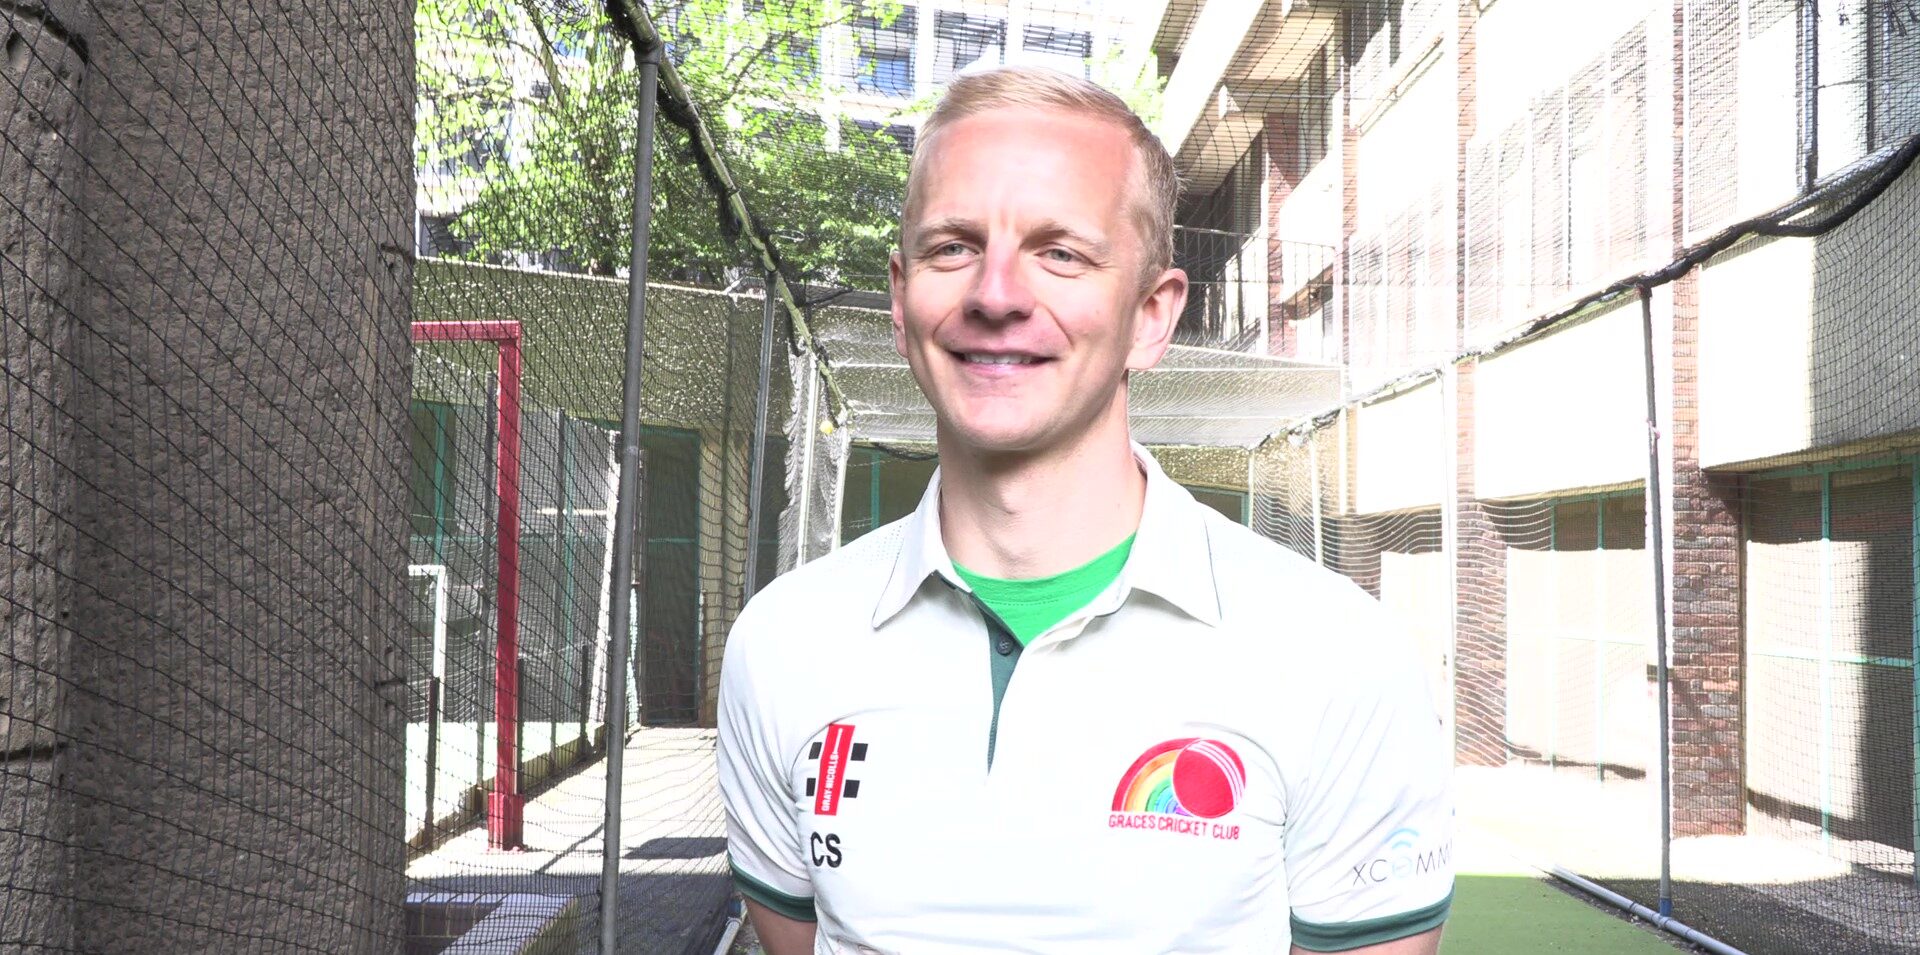 Chris Sherwood from Graces Cricket Club speaks to the PA news agency